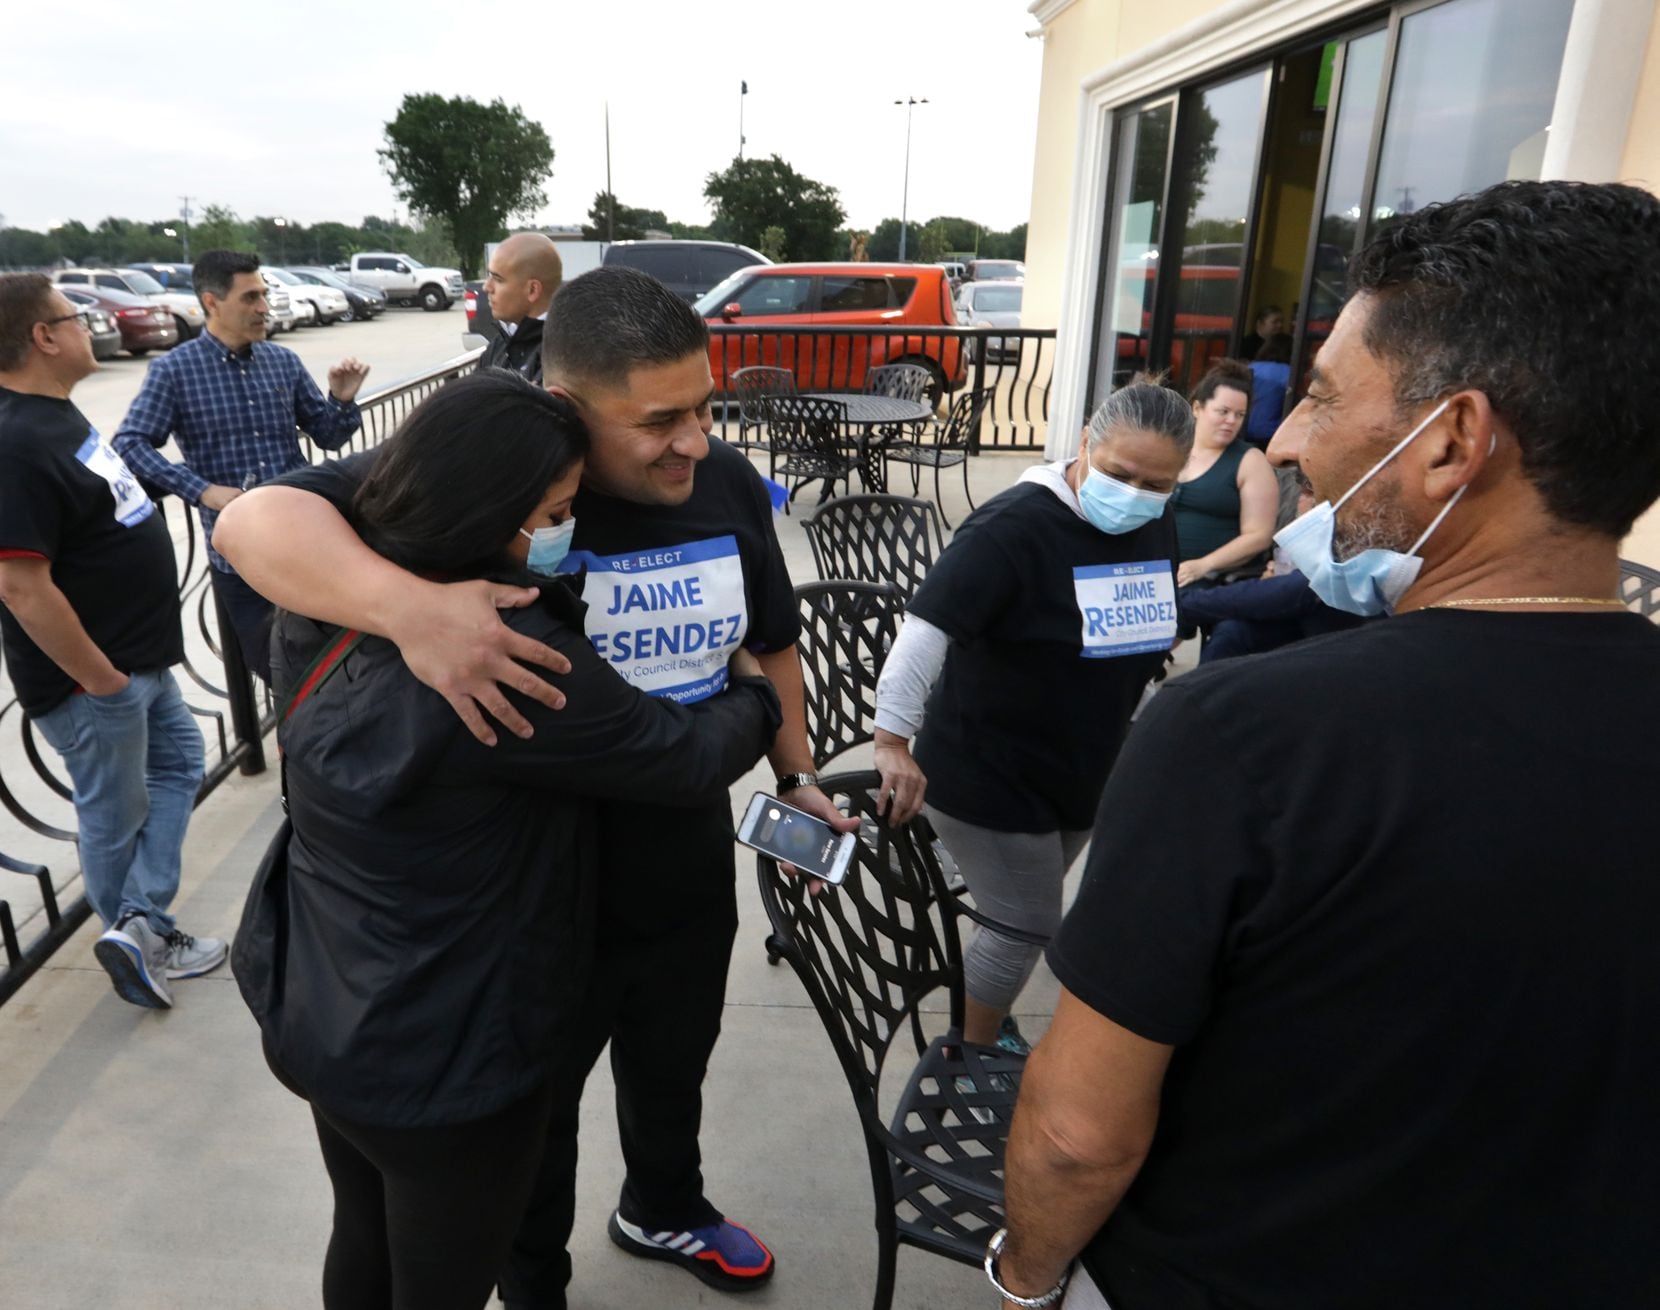 Victoria Resendez, left, and Jaime Resendez embrace as supporters keep an eye on the...